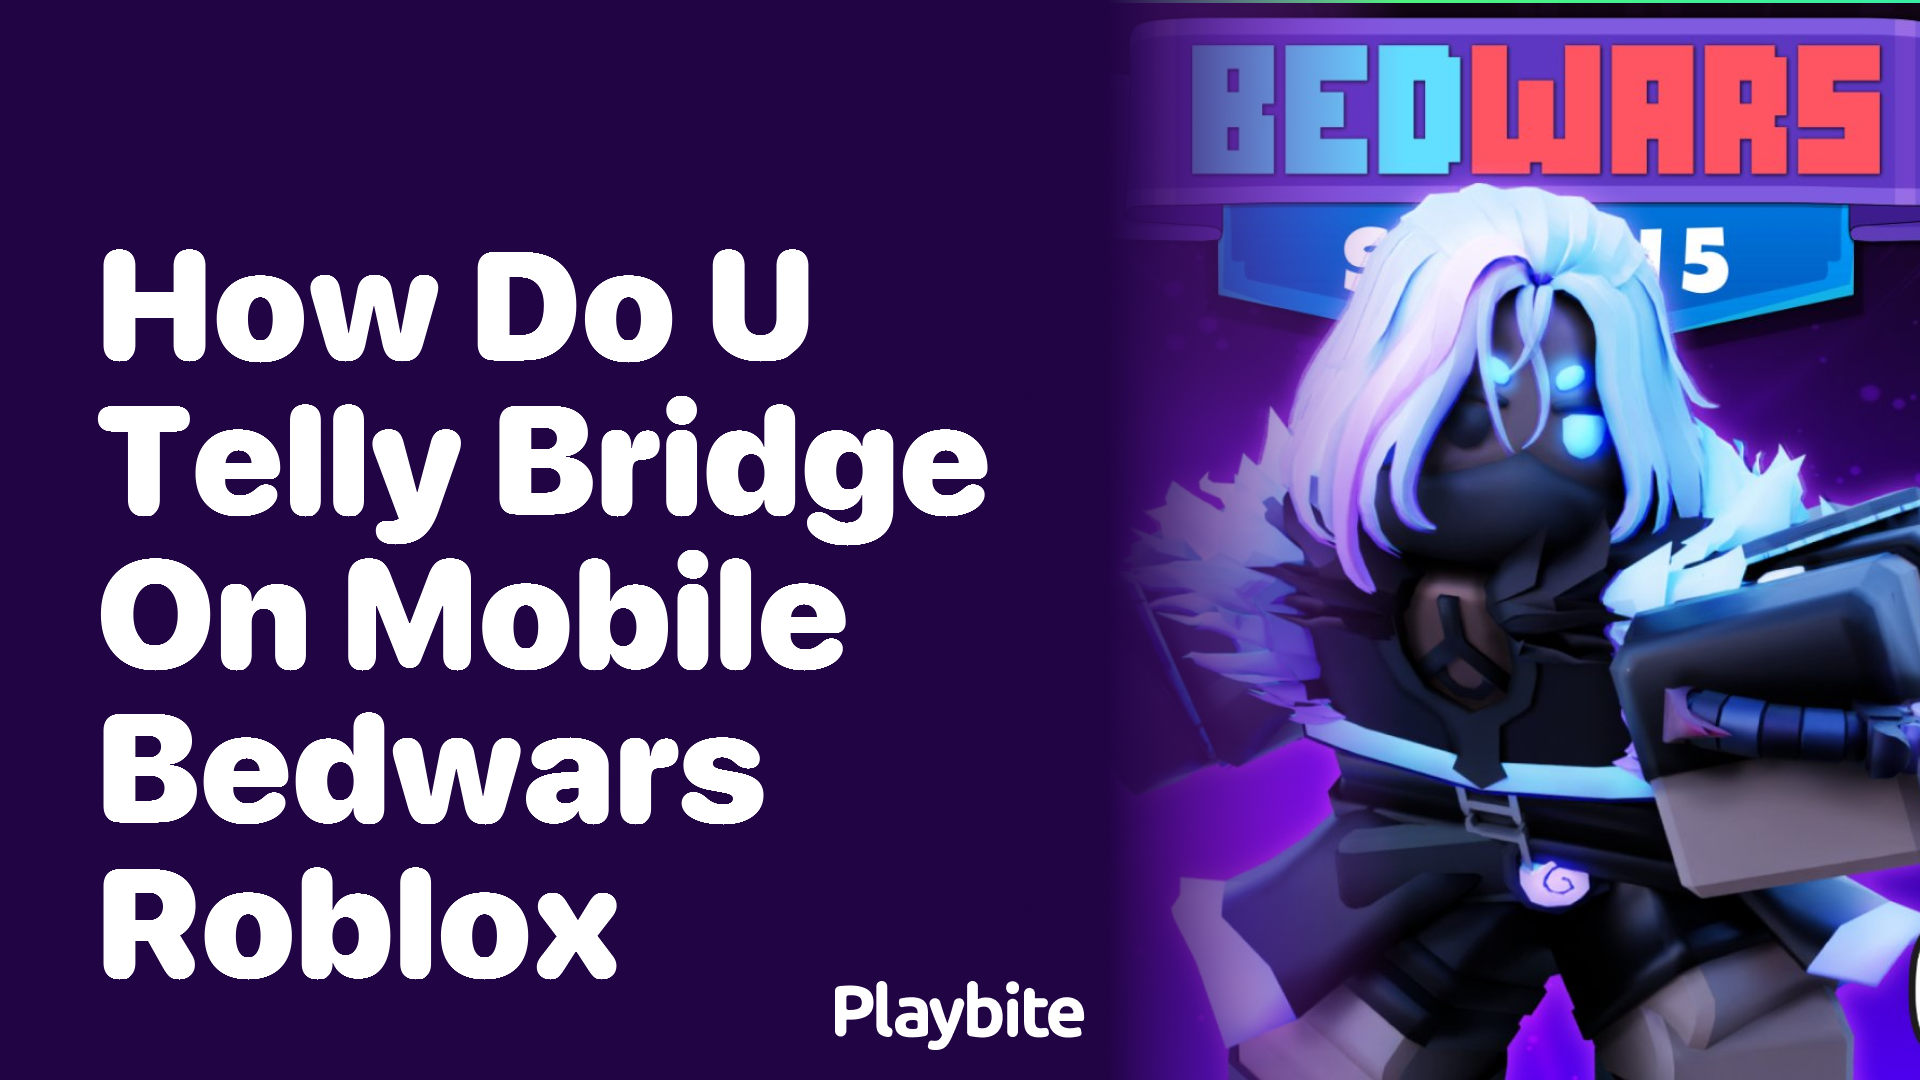 How Do You Telly Bridge on Mobile Bedwars Roblox?